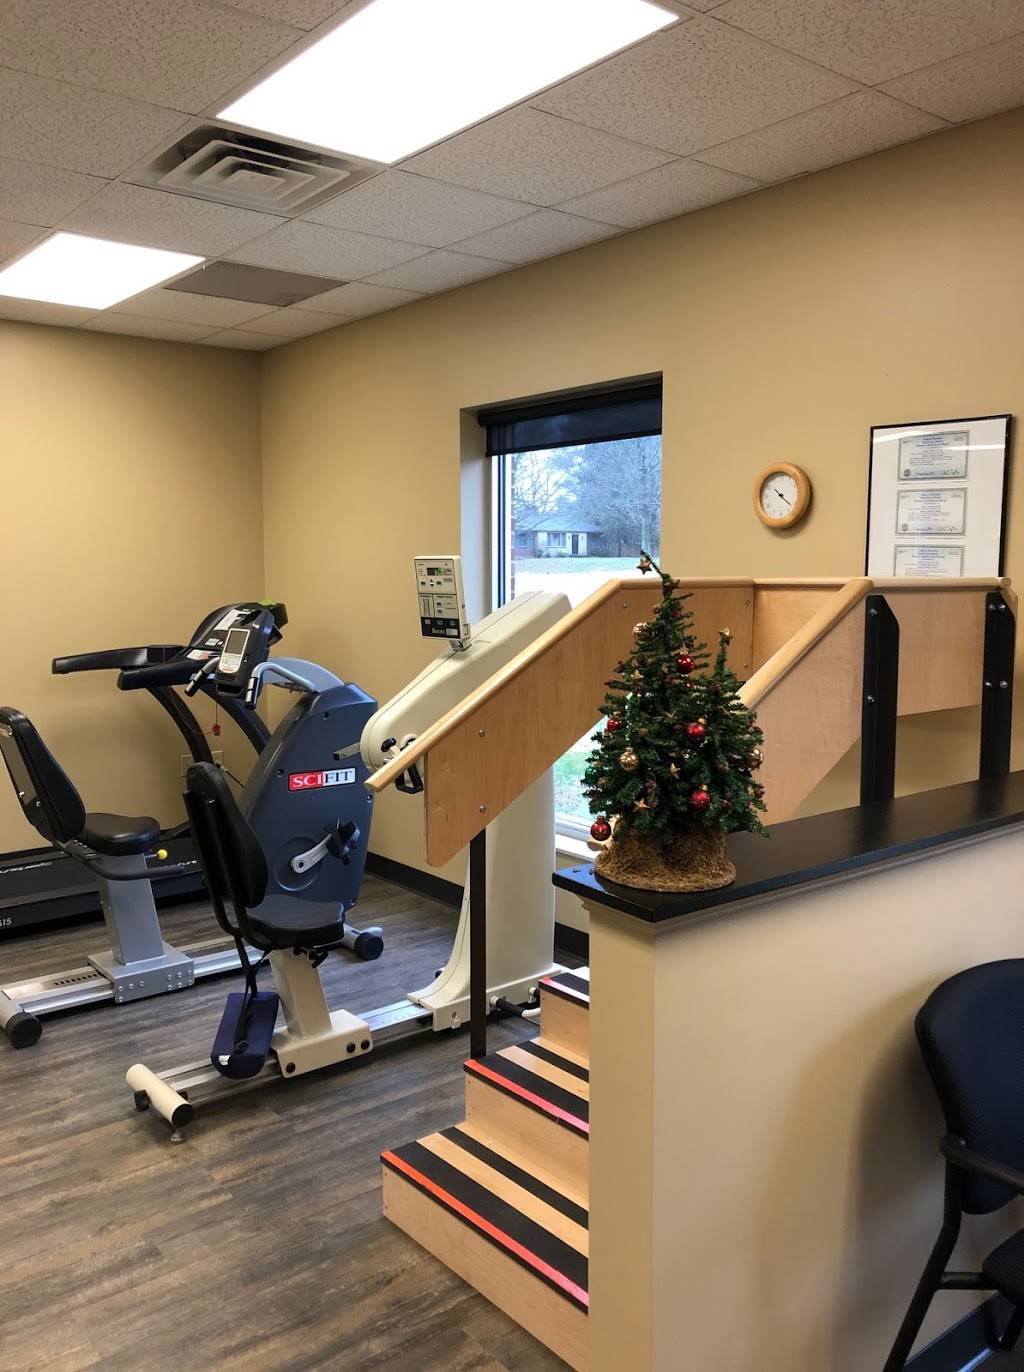 STAR Physical Therapy | 2339 Hillsboro Rd Ste 101, Franklin, TN 37069, USA | Phone: (615) 261-0245